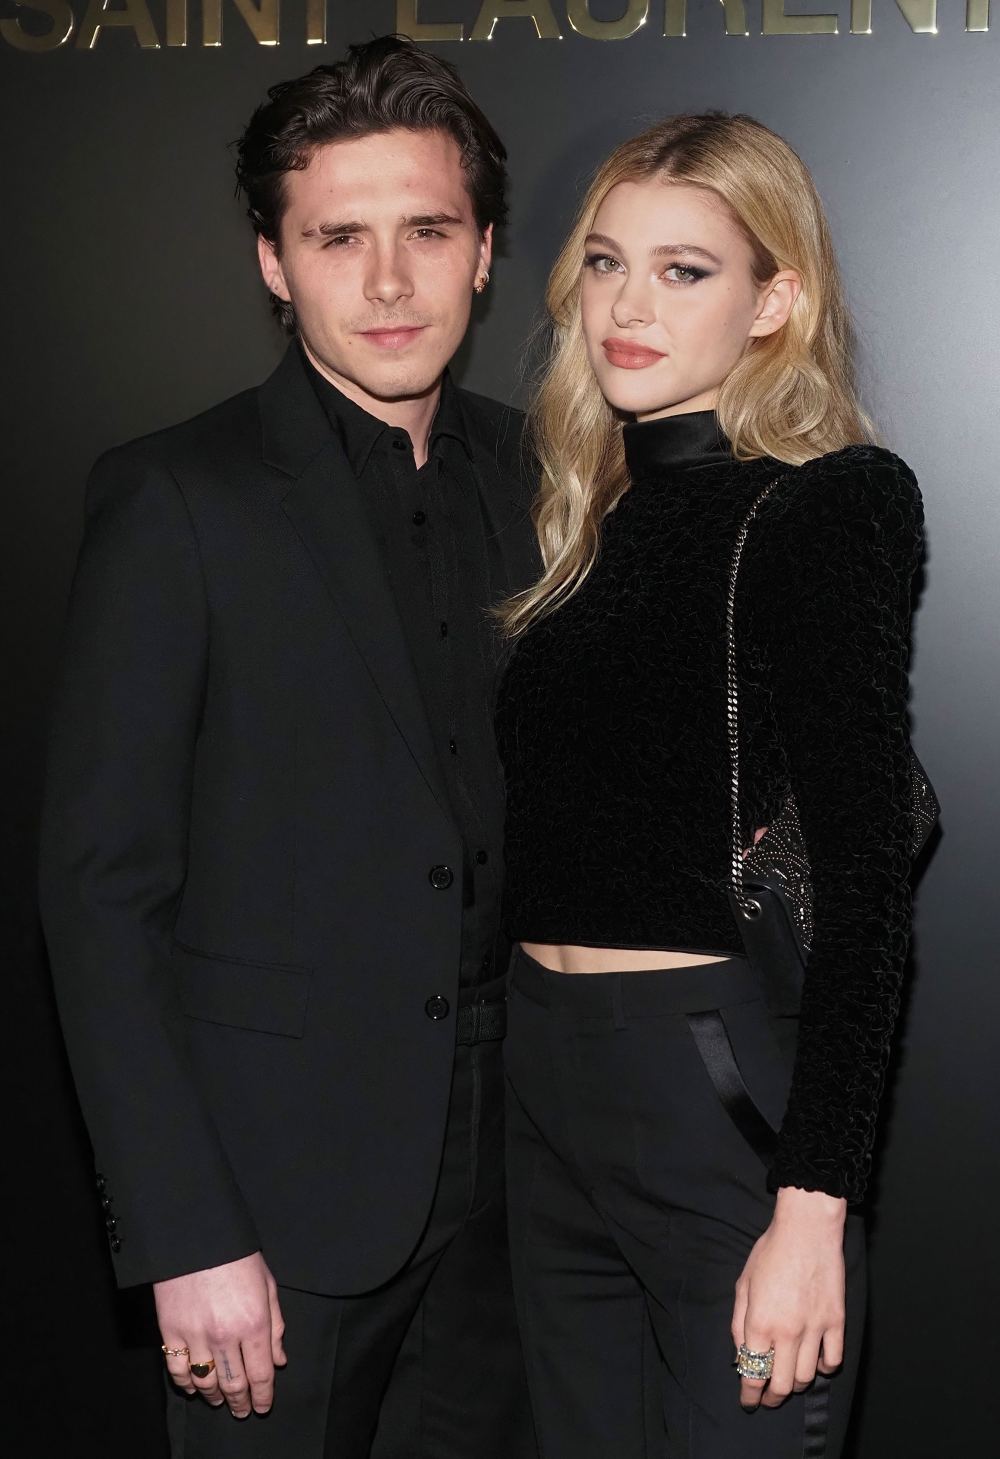 Brooklyn Beckham Debuts a New Tattoo That Many Think Is of Nicola Peltz's Eyes